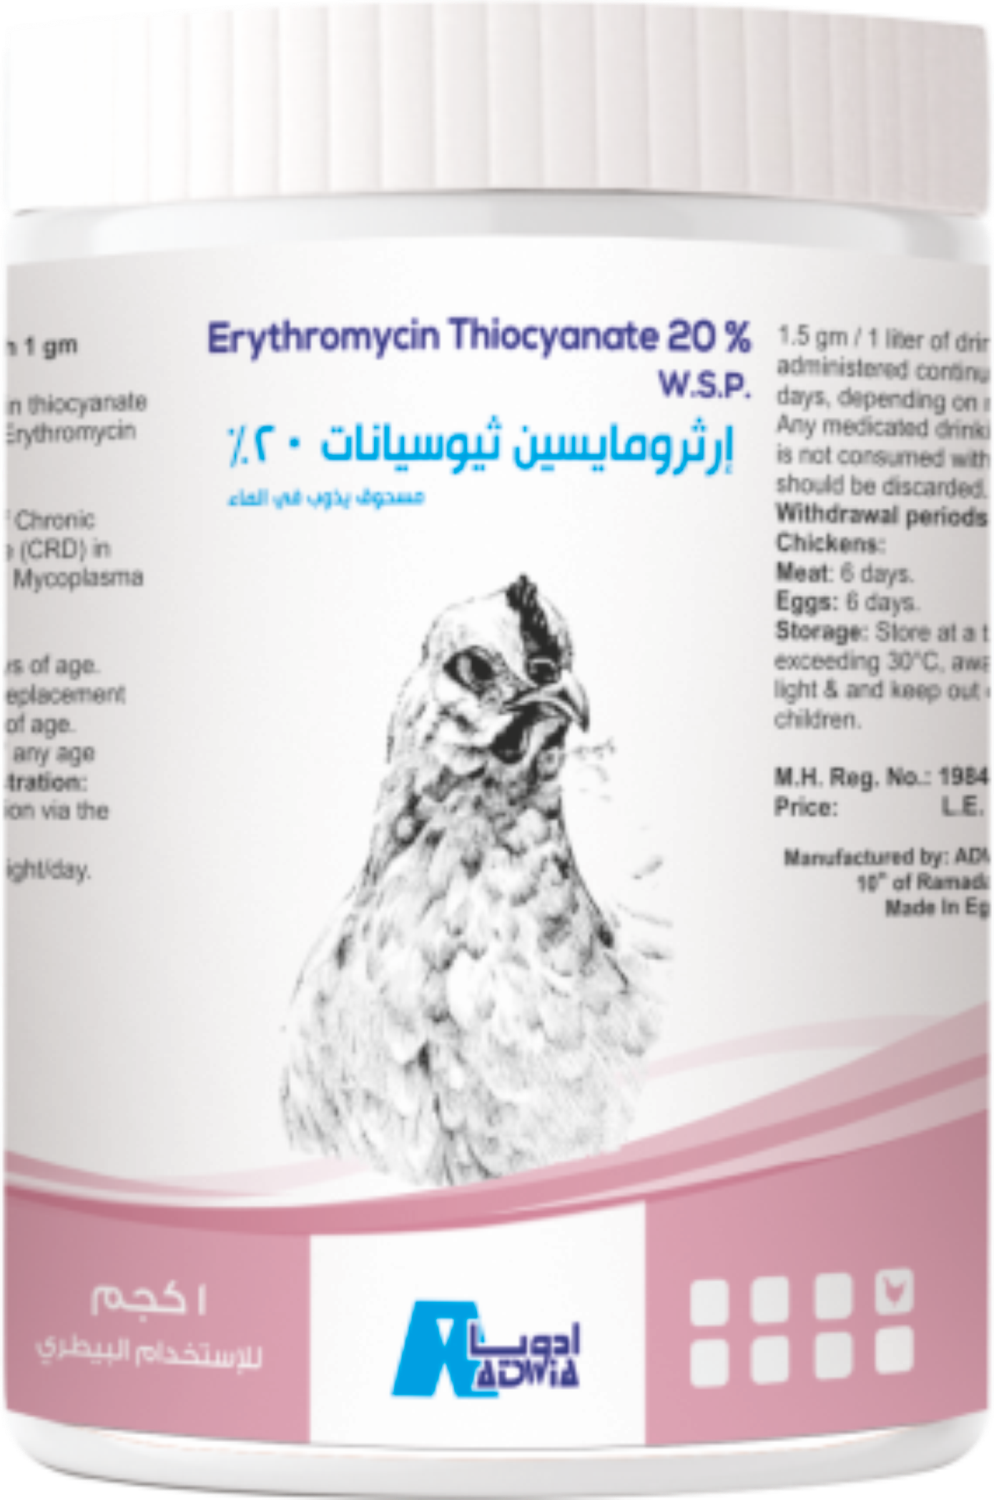 image for Erythromycin Thiocyanate 20%